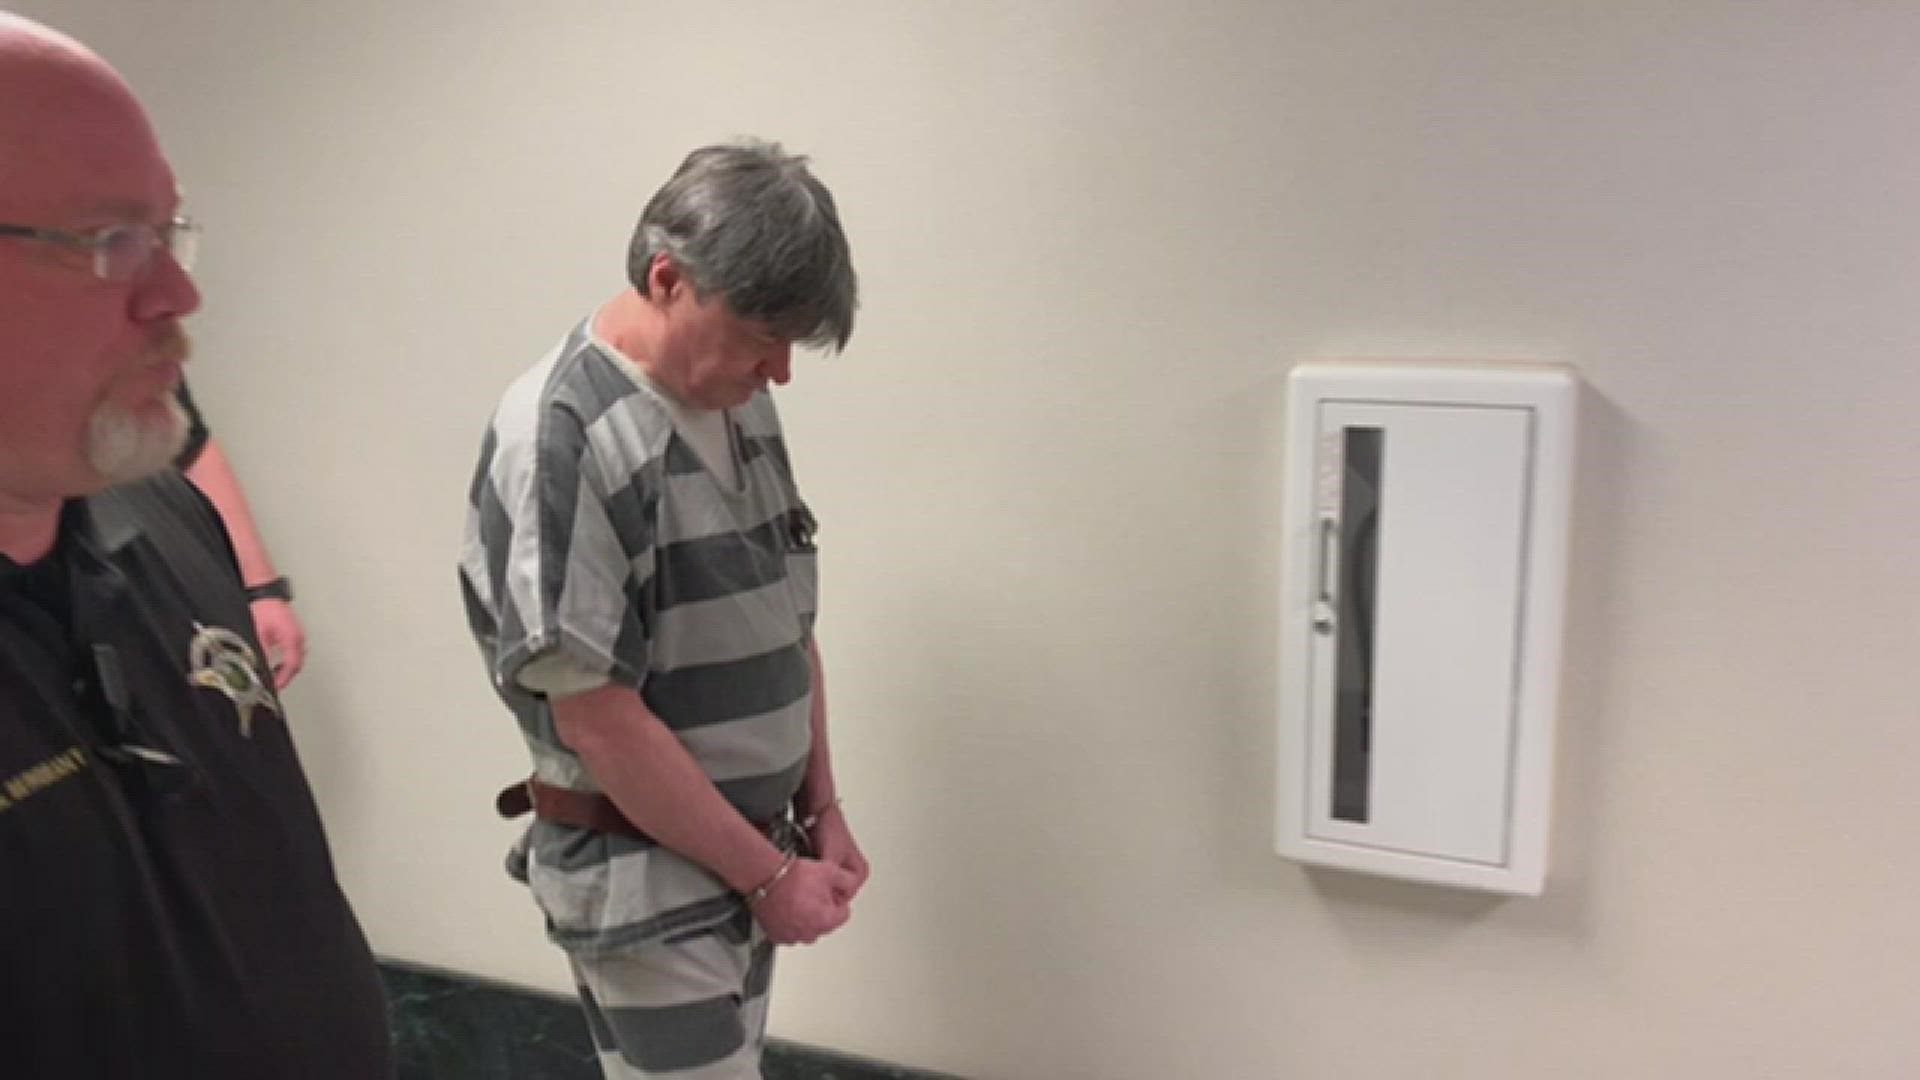 Steven Ray Hessler was convicted in early March of 19 felony charges for crimes against 10 victims between 1982-85.